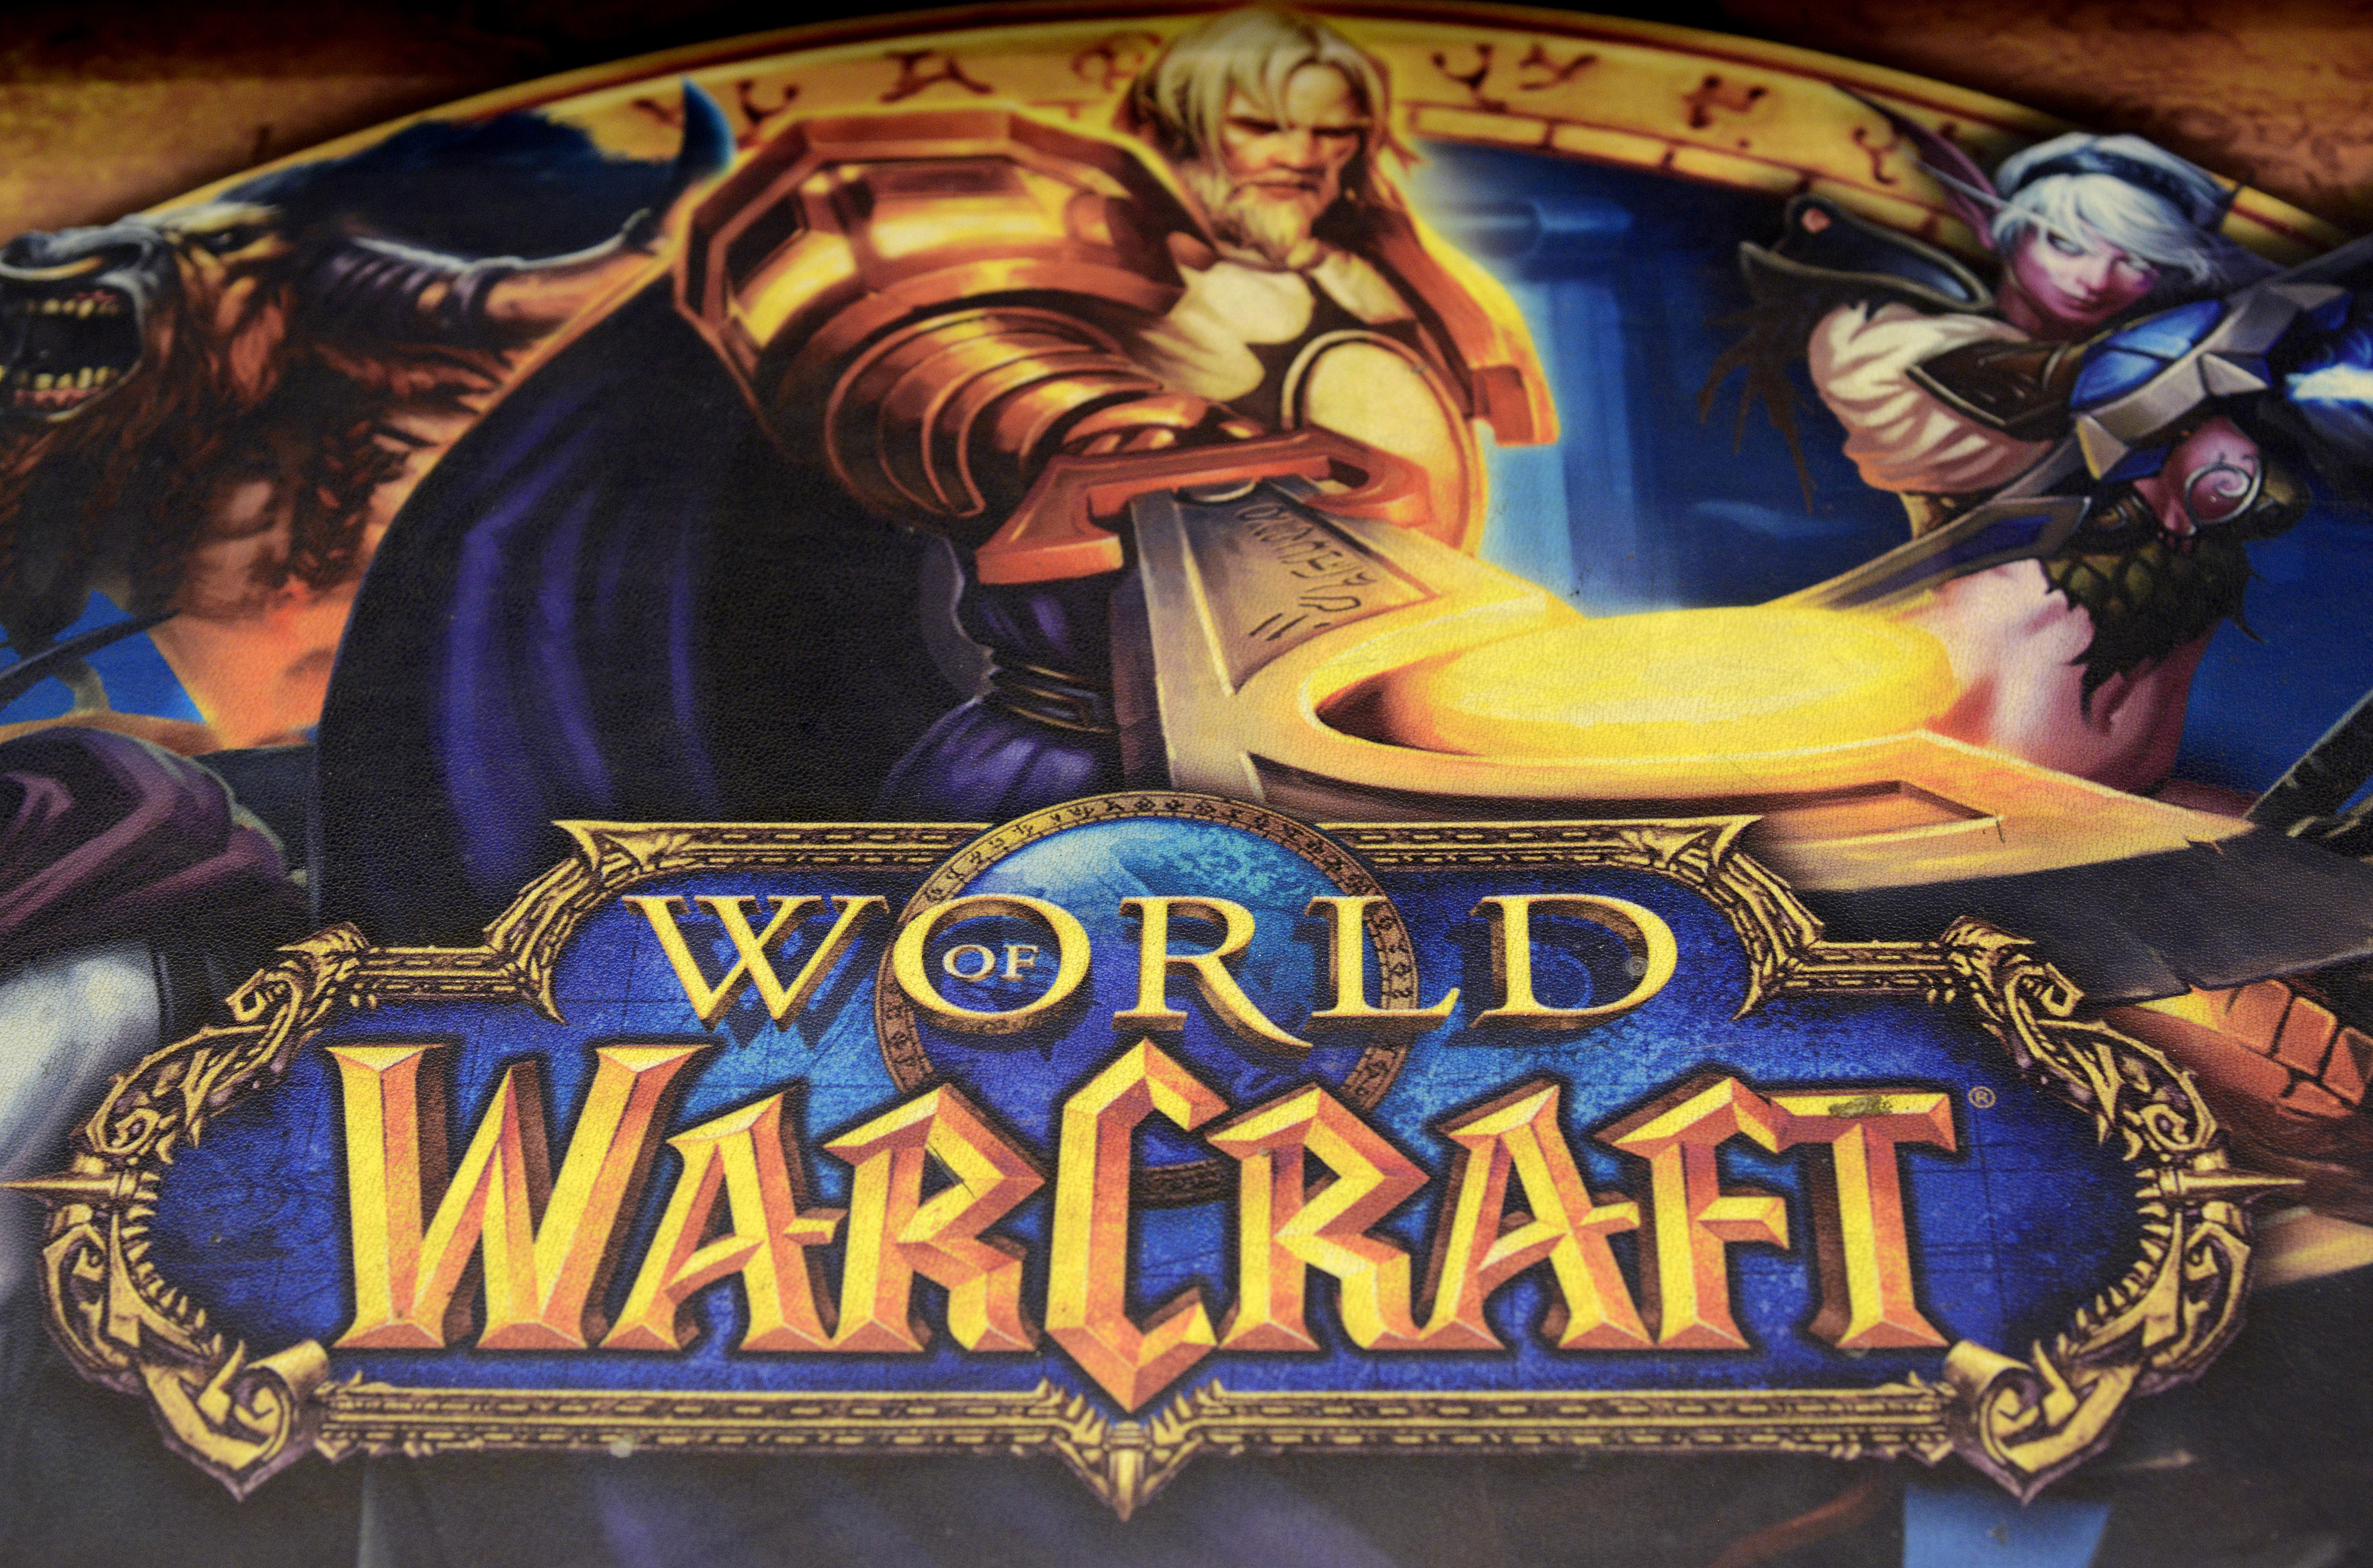 An advertisement for the ''World of Warcraft'' game, produced by Activision Blizzard Inc., a video-game publishing unit of Vivendi SA, is displayed at a store in Paris, France